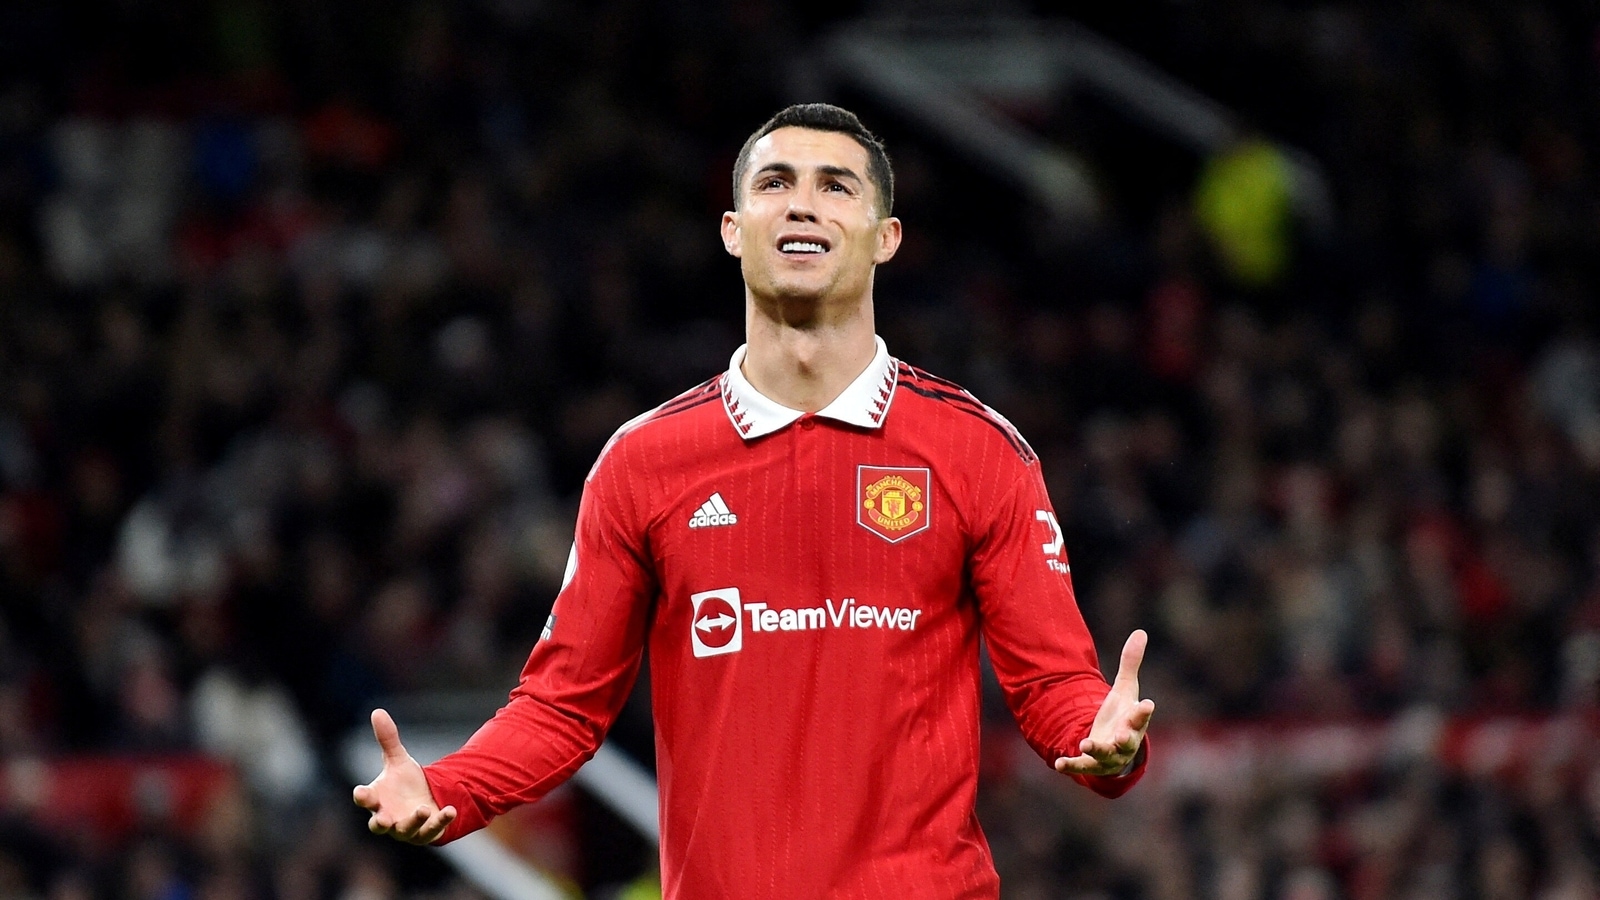 he-s-special-but-wasn-t-playing-cristiano-ronaldo-s-former-portugal-captain-reacts-to-his-manchester-united-ouster